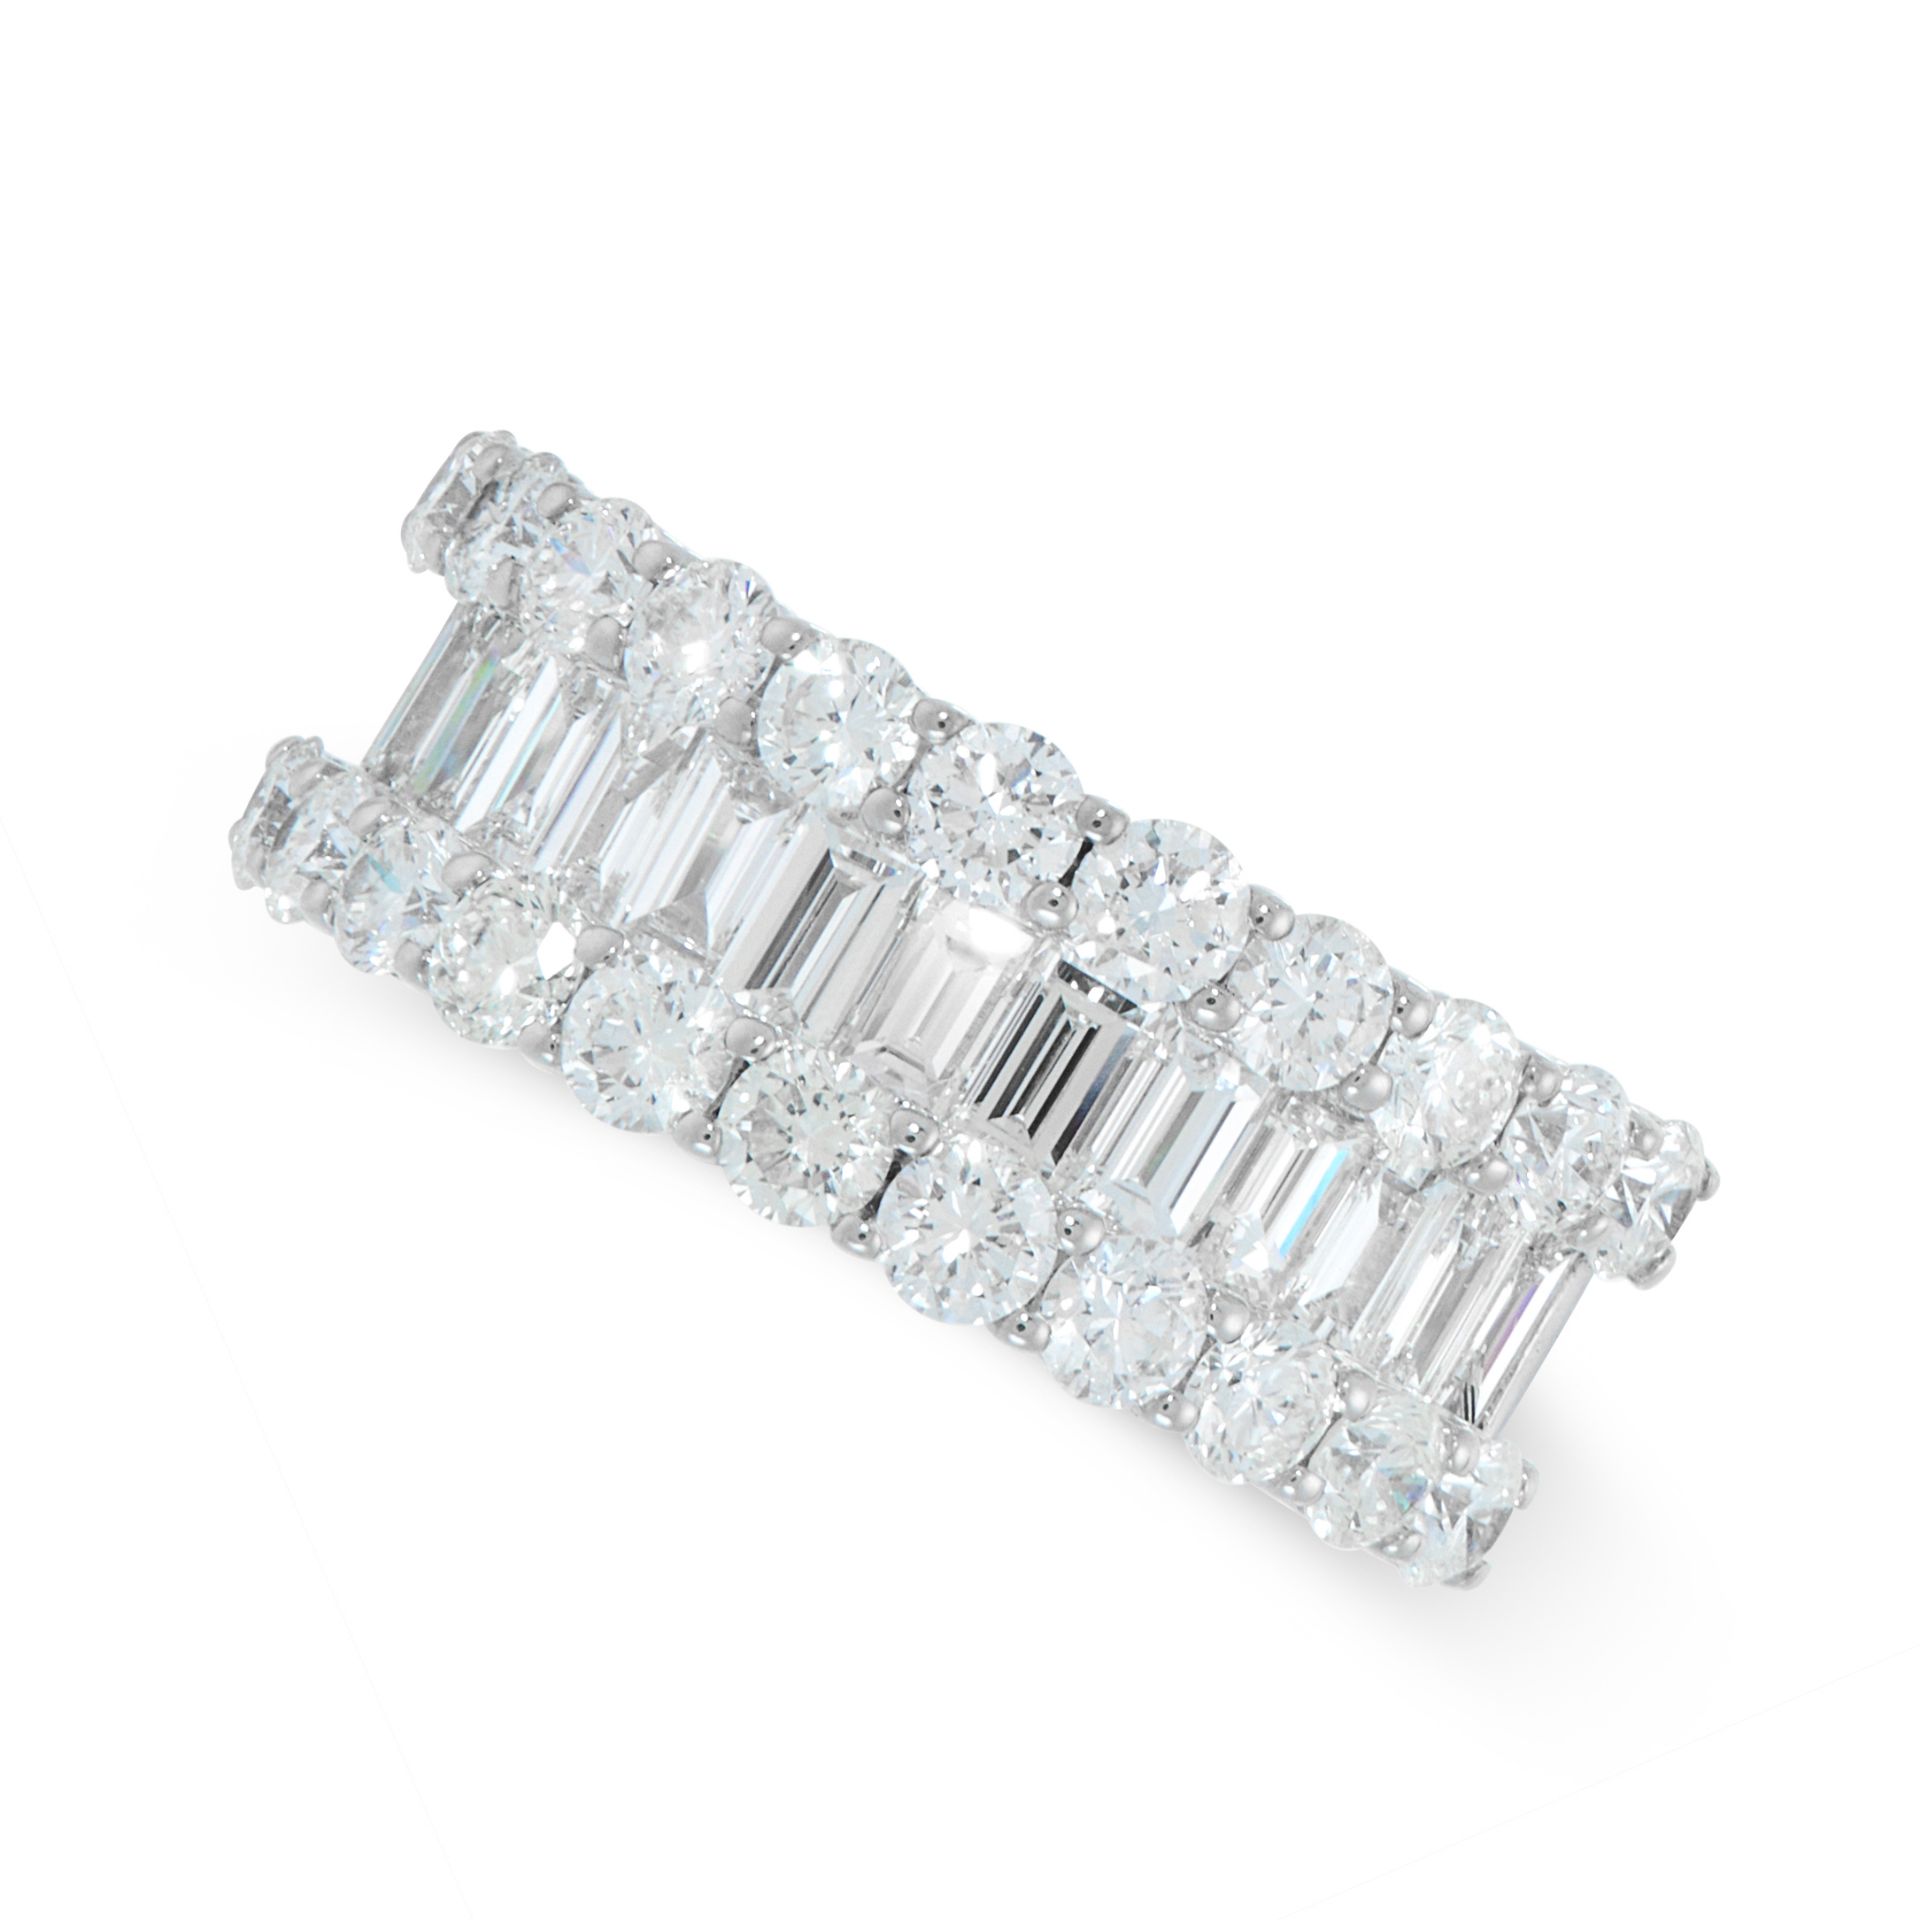 A DIAMOND ETERNITY RING in 18ct white gold, the band set half way around with a row of baguette